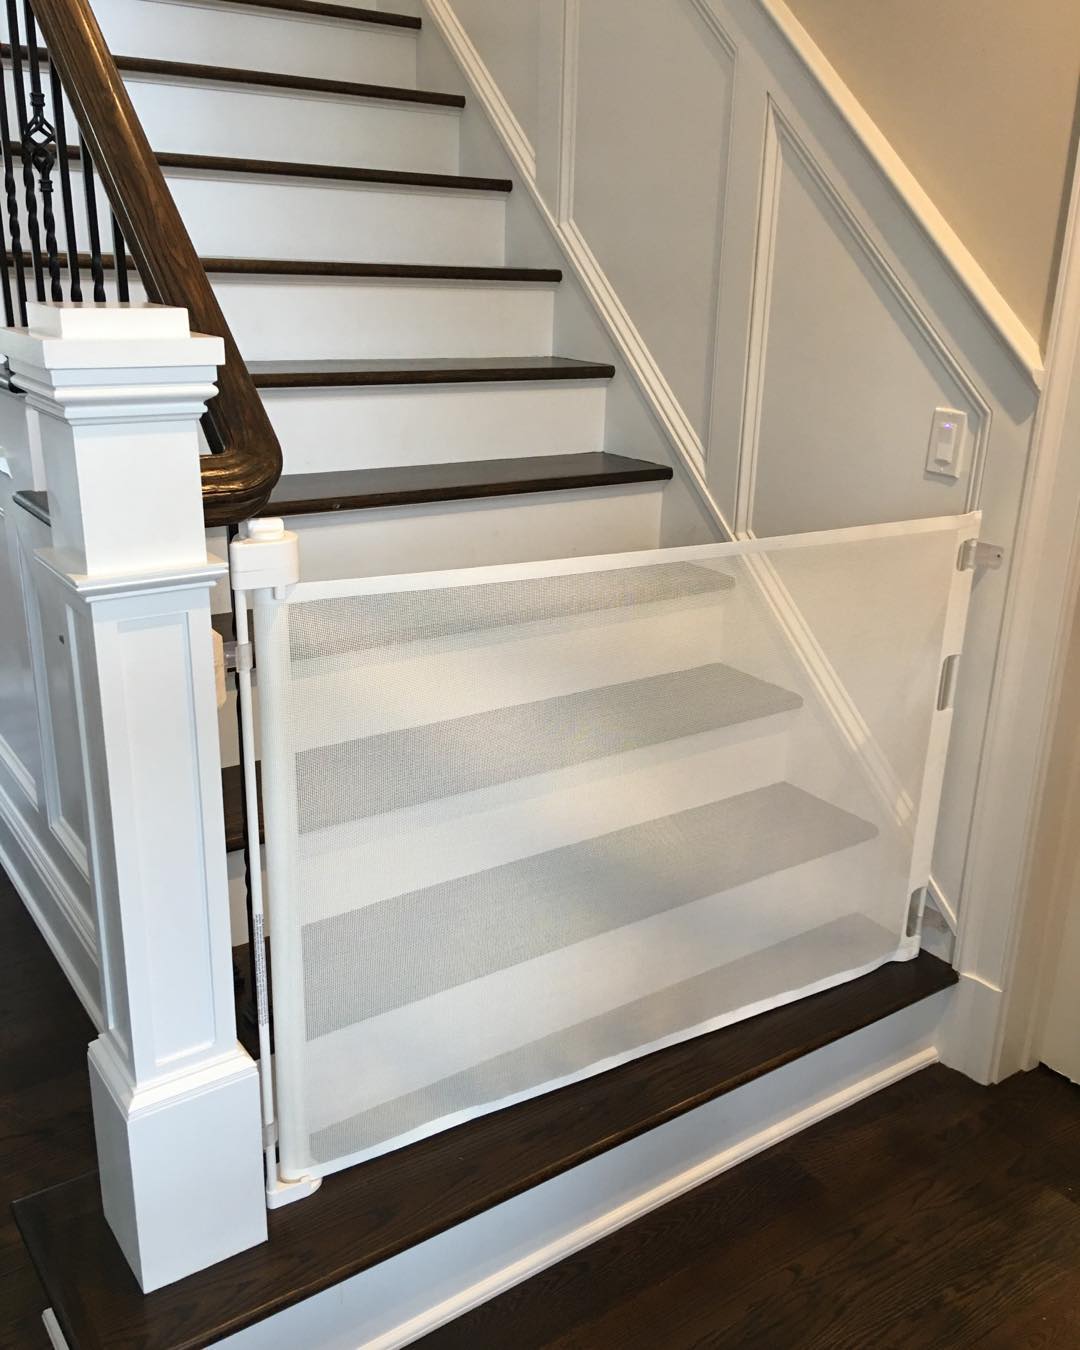 Baby gate installed at bottom of stairs. Photo by @pbandjbabyproofing_playrooms